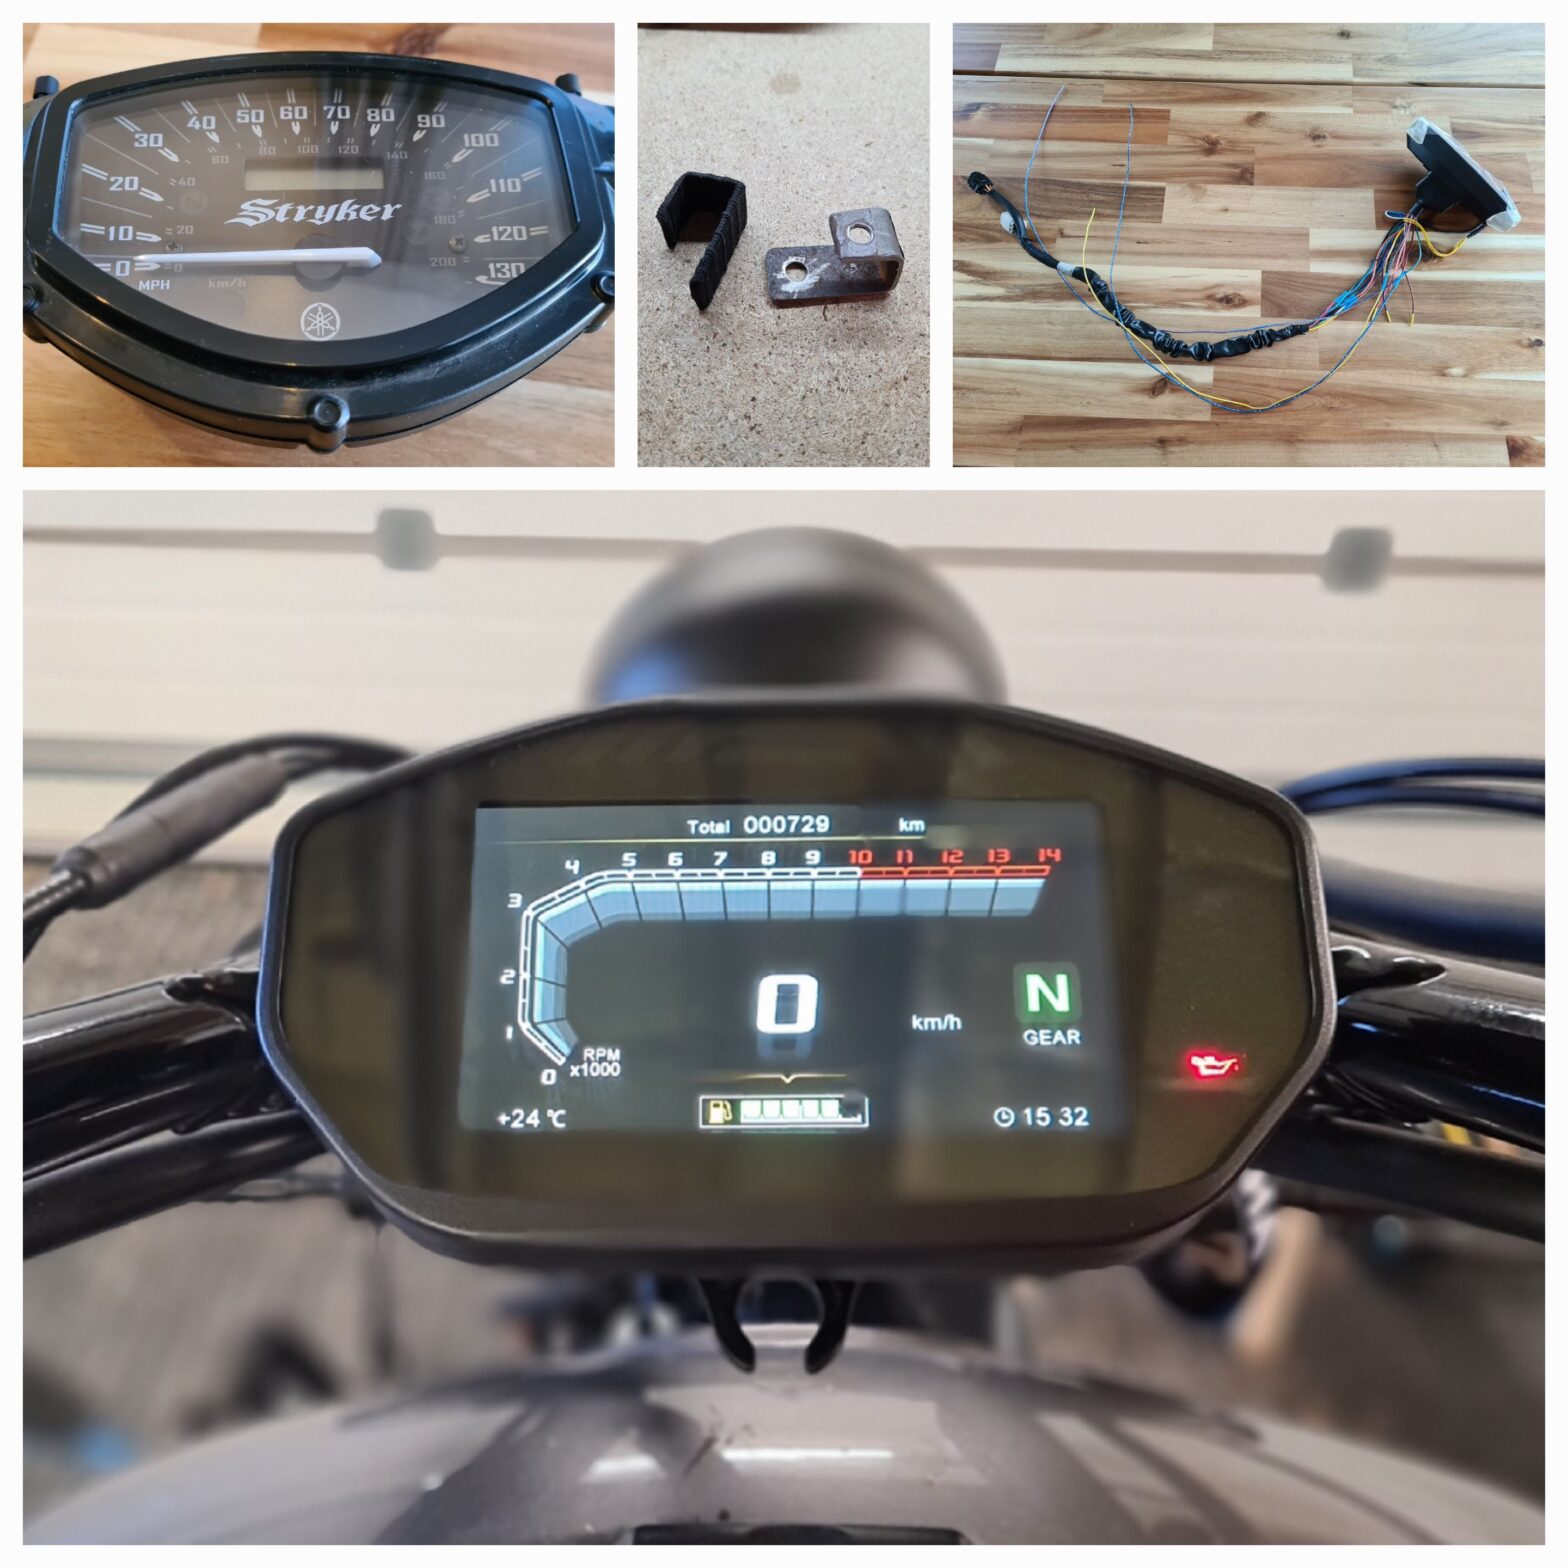 Yamaha Stryker cooling issues – resolved